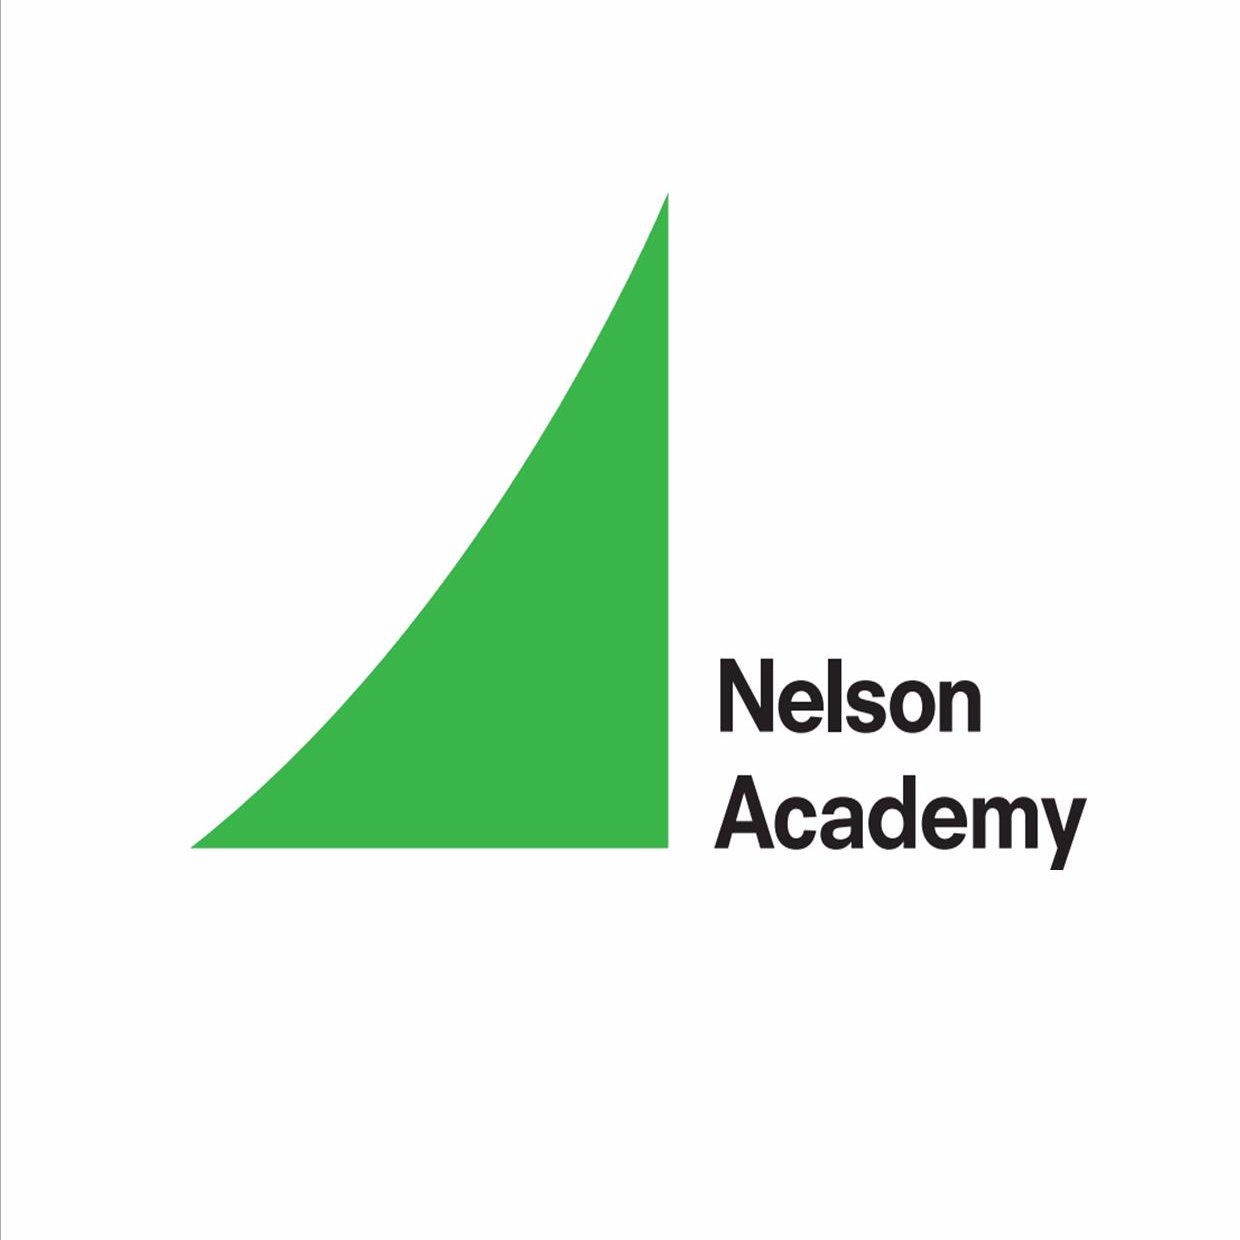 At Nelson Academy we aim to create an outstanding educational environment where everybody is valued. Our motto is ‘Achieving Through Learning’.